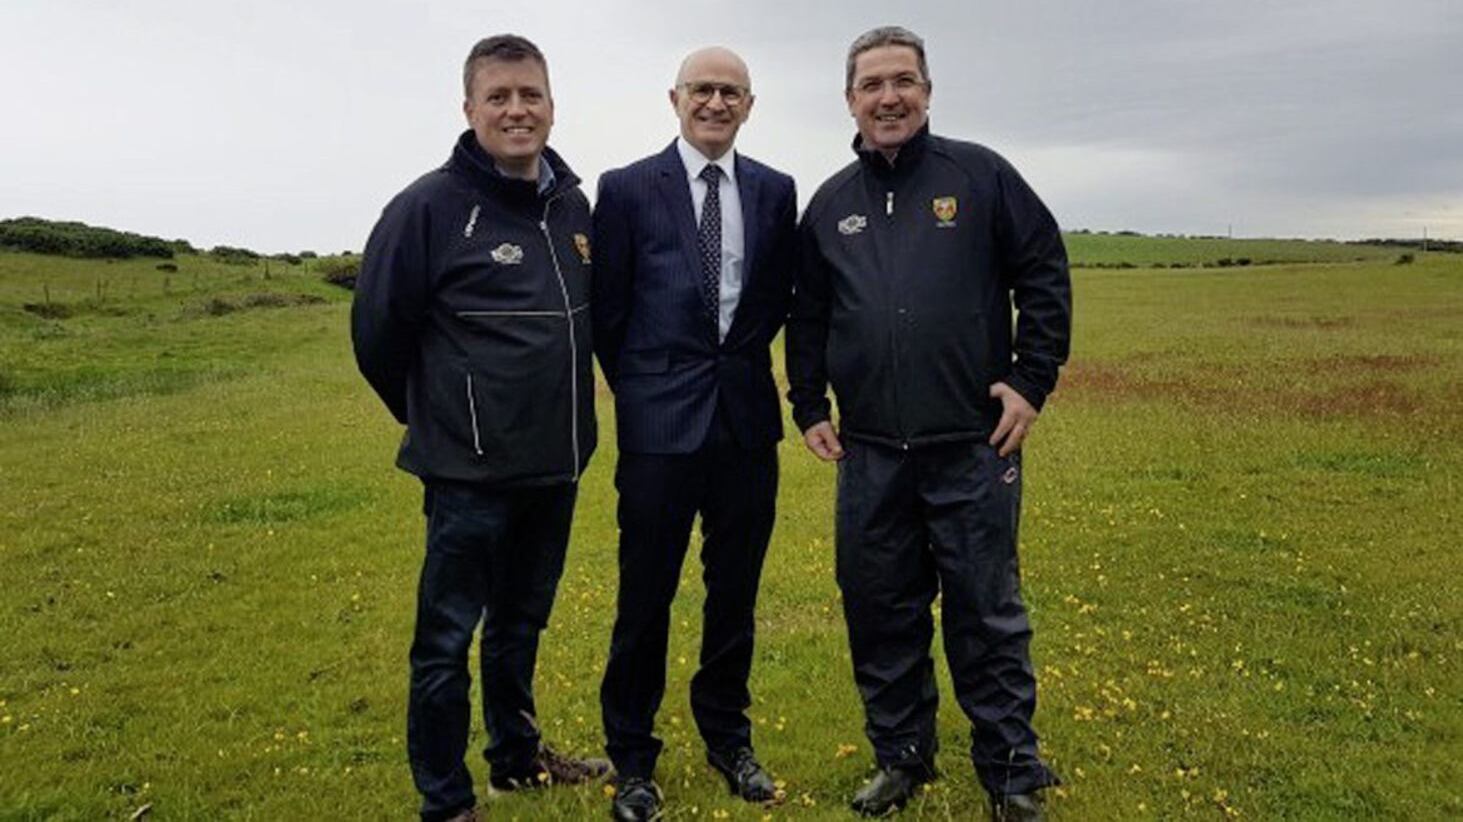 Down County Board chairman Sean Rooney (right) and Down GAA treasurer Diarmuid Cahill (left) with Colm McGurk of McGurk Chartered Architects back in June